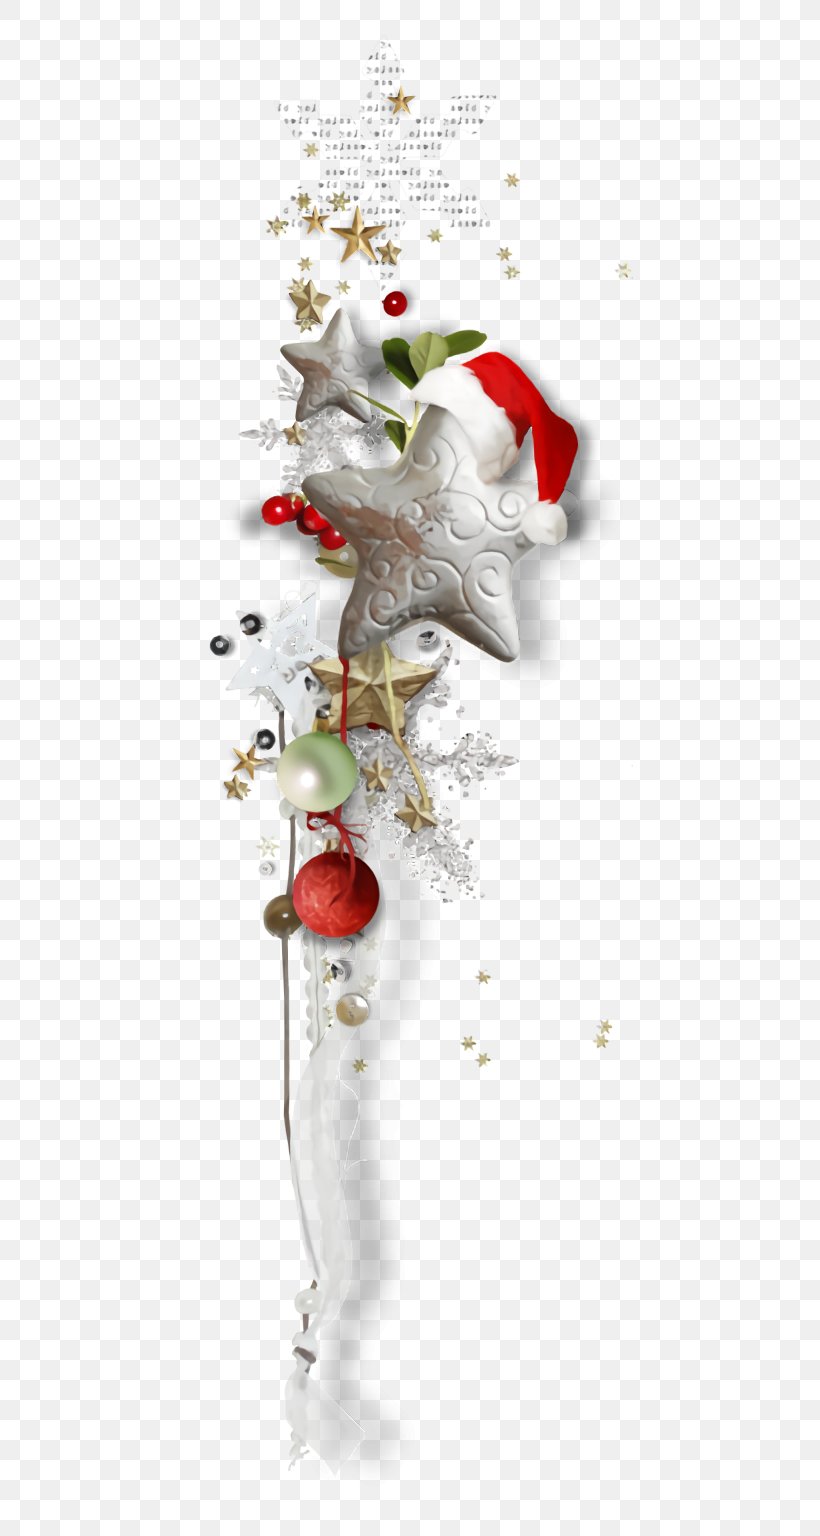 Christmas Ornaments Christmas Decoration Christmas, PNG, 446x1536px, Christmas Ornaments, Christmas, Christmas Decoration, Christmas Ornament, Holiday Ornament Download Free